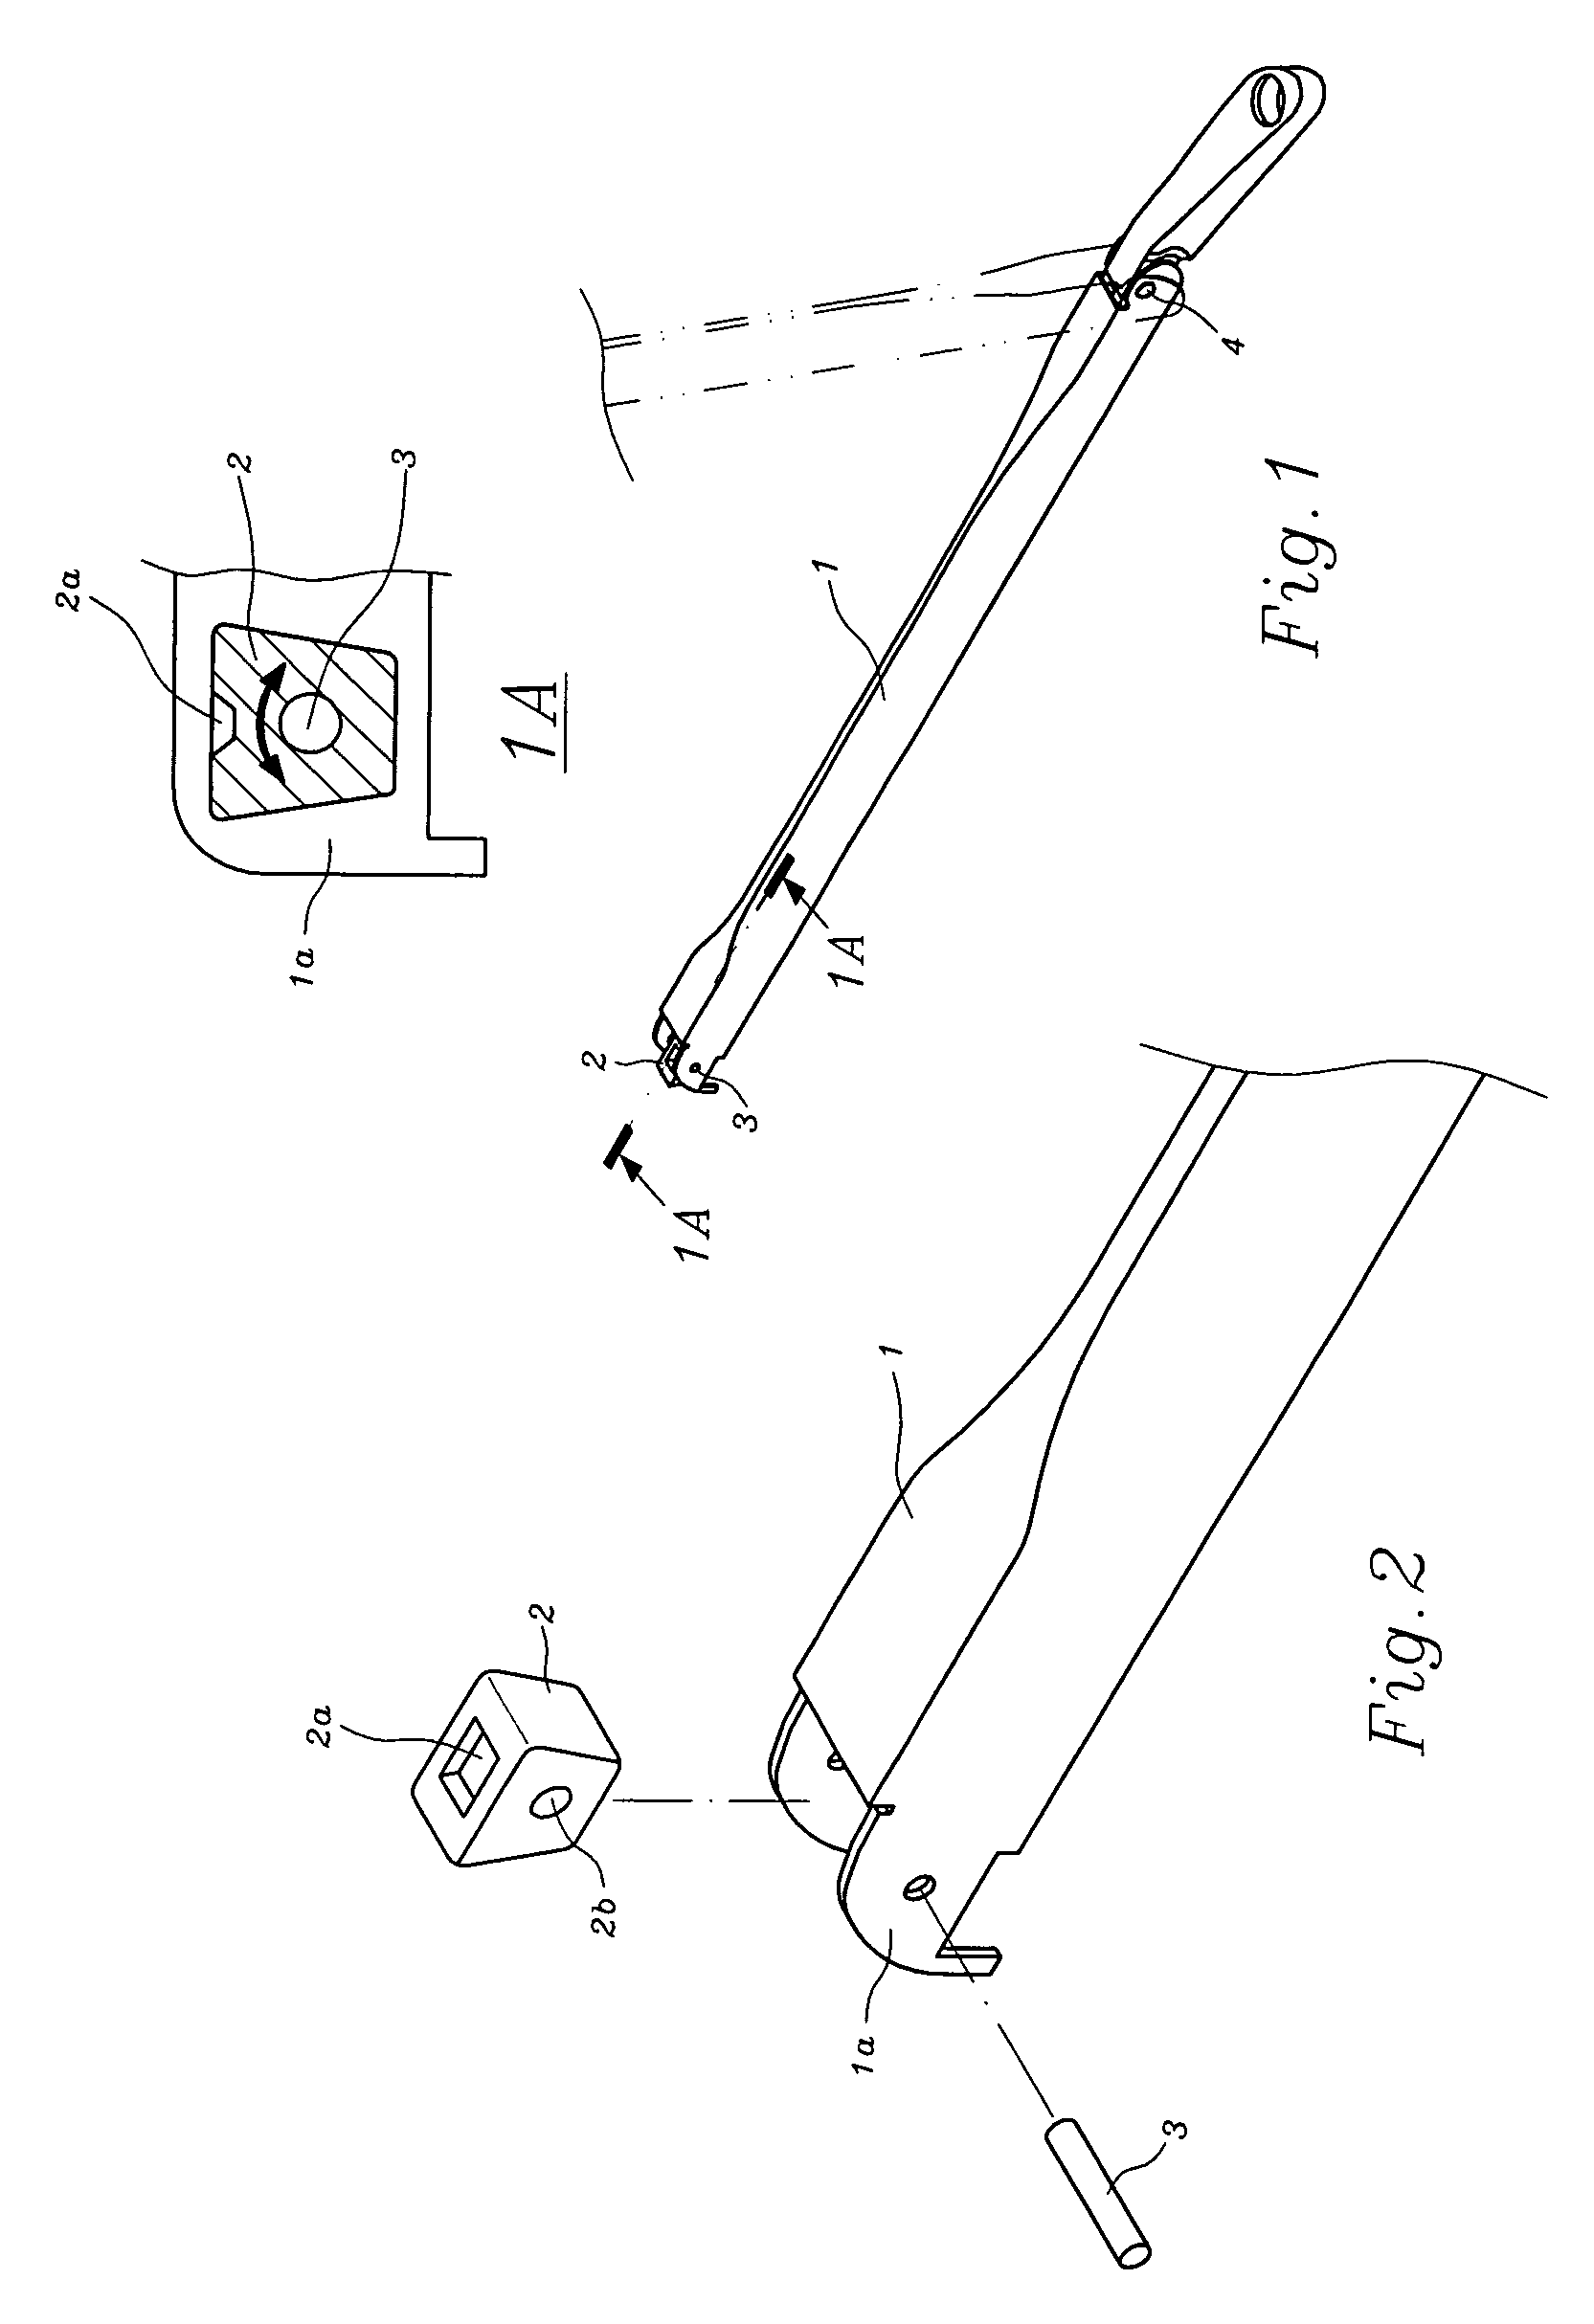 Joint assembly of a car windshield wiper arm